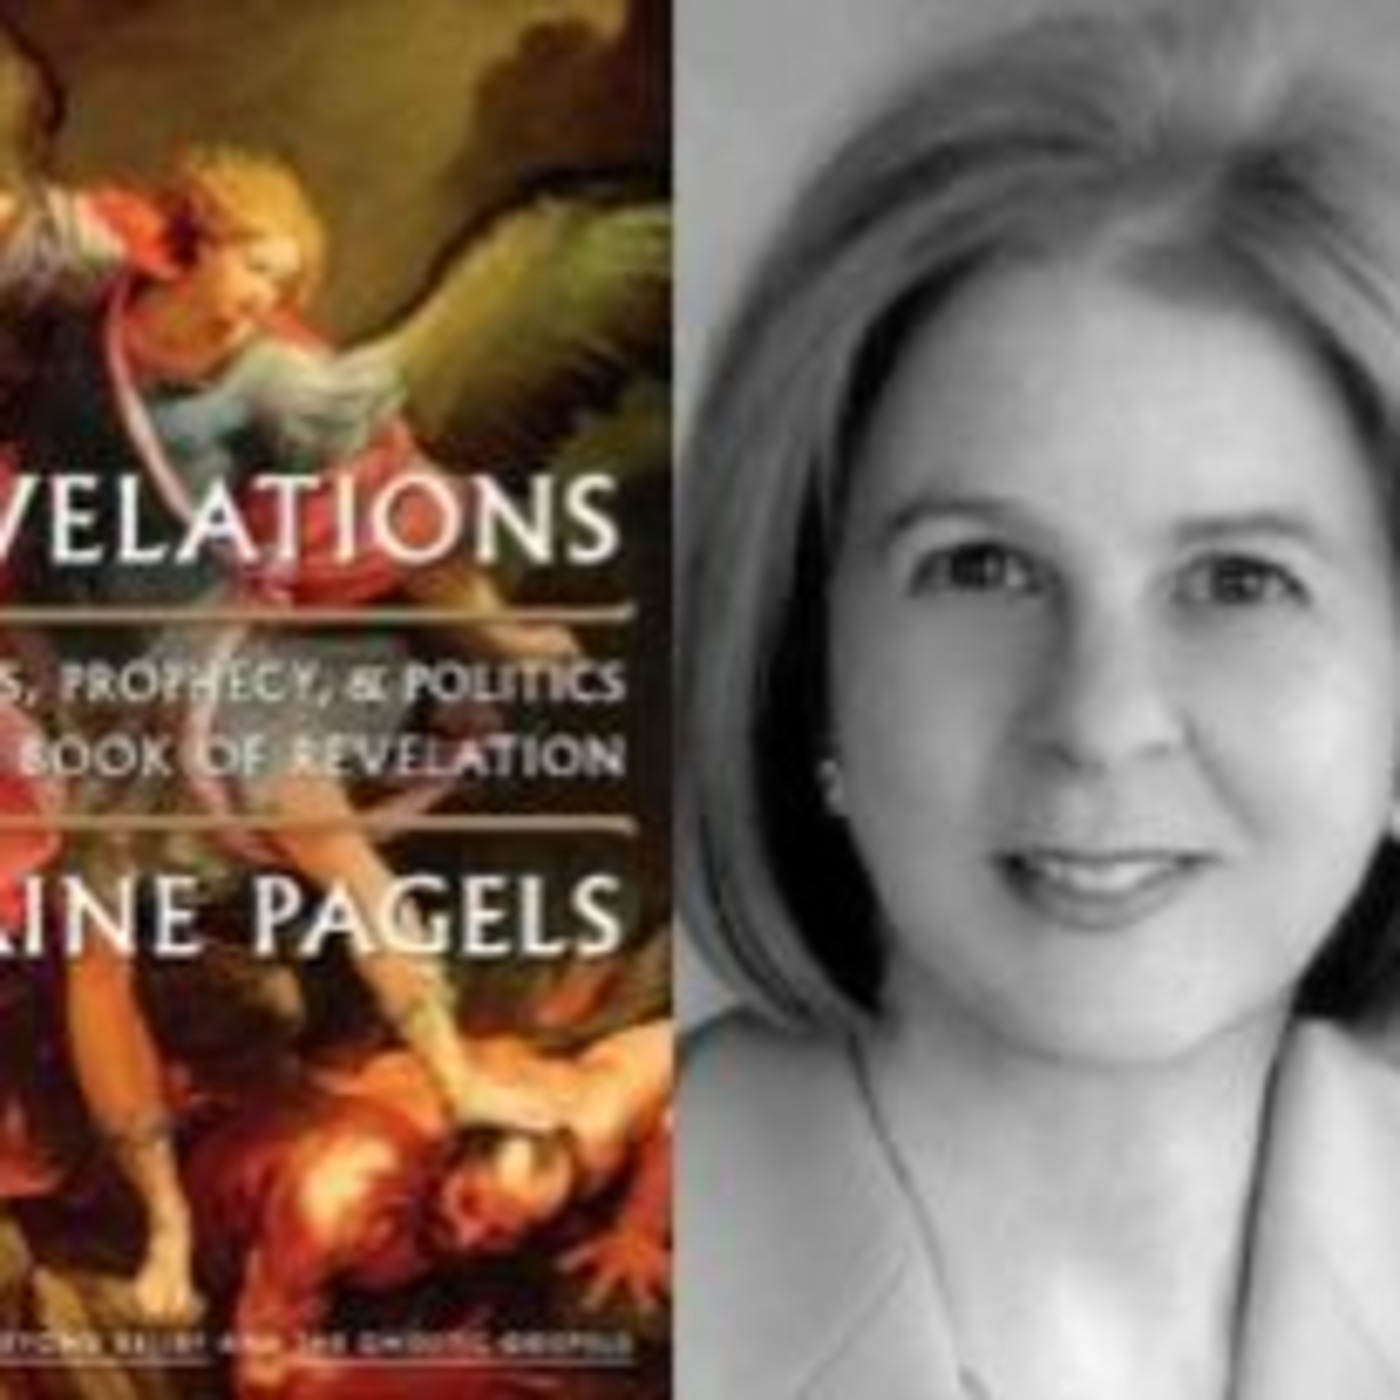 Free Forum Q&A:  ELAINE PAGELS  MacArthur and National Book Award winner REVELATIONS: Visions, Prophesy,  and Politics in the Book of Revelations